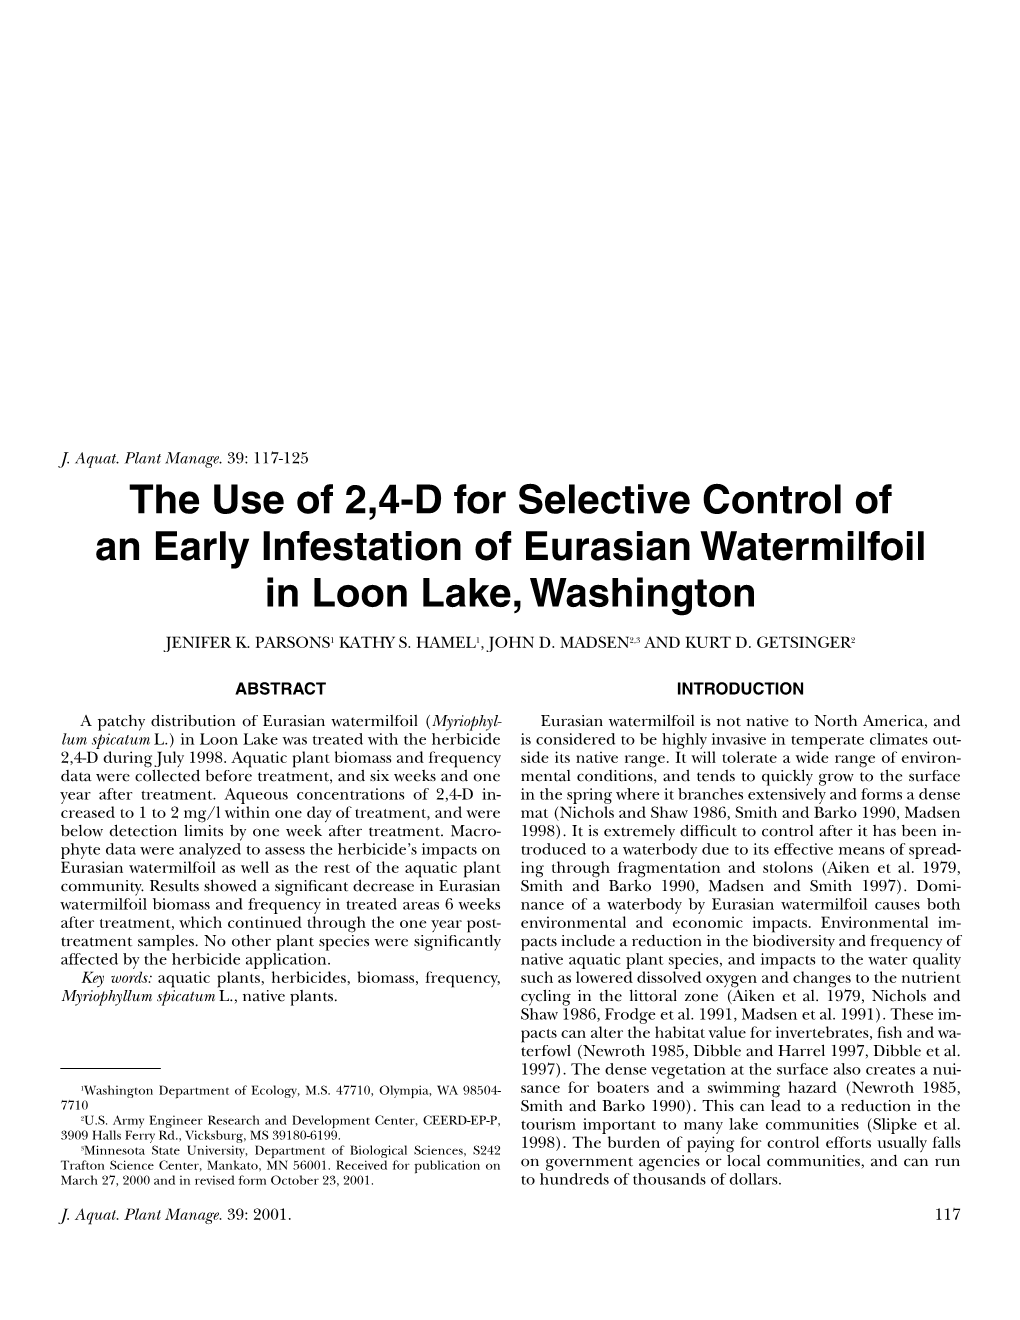 The Use of 2,4-D for Selective Control of an Early Infestation of Eurasian Watermilfoil in Loon Lake, Washington